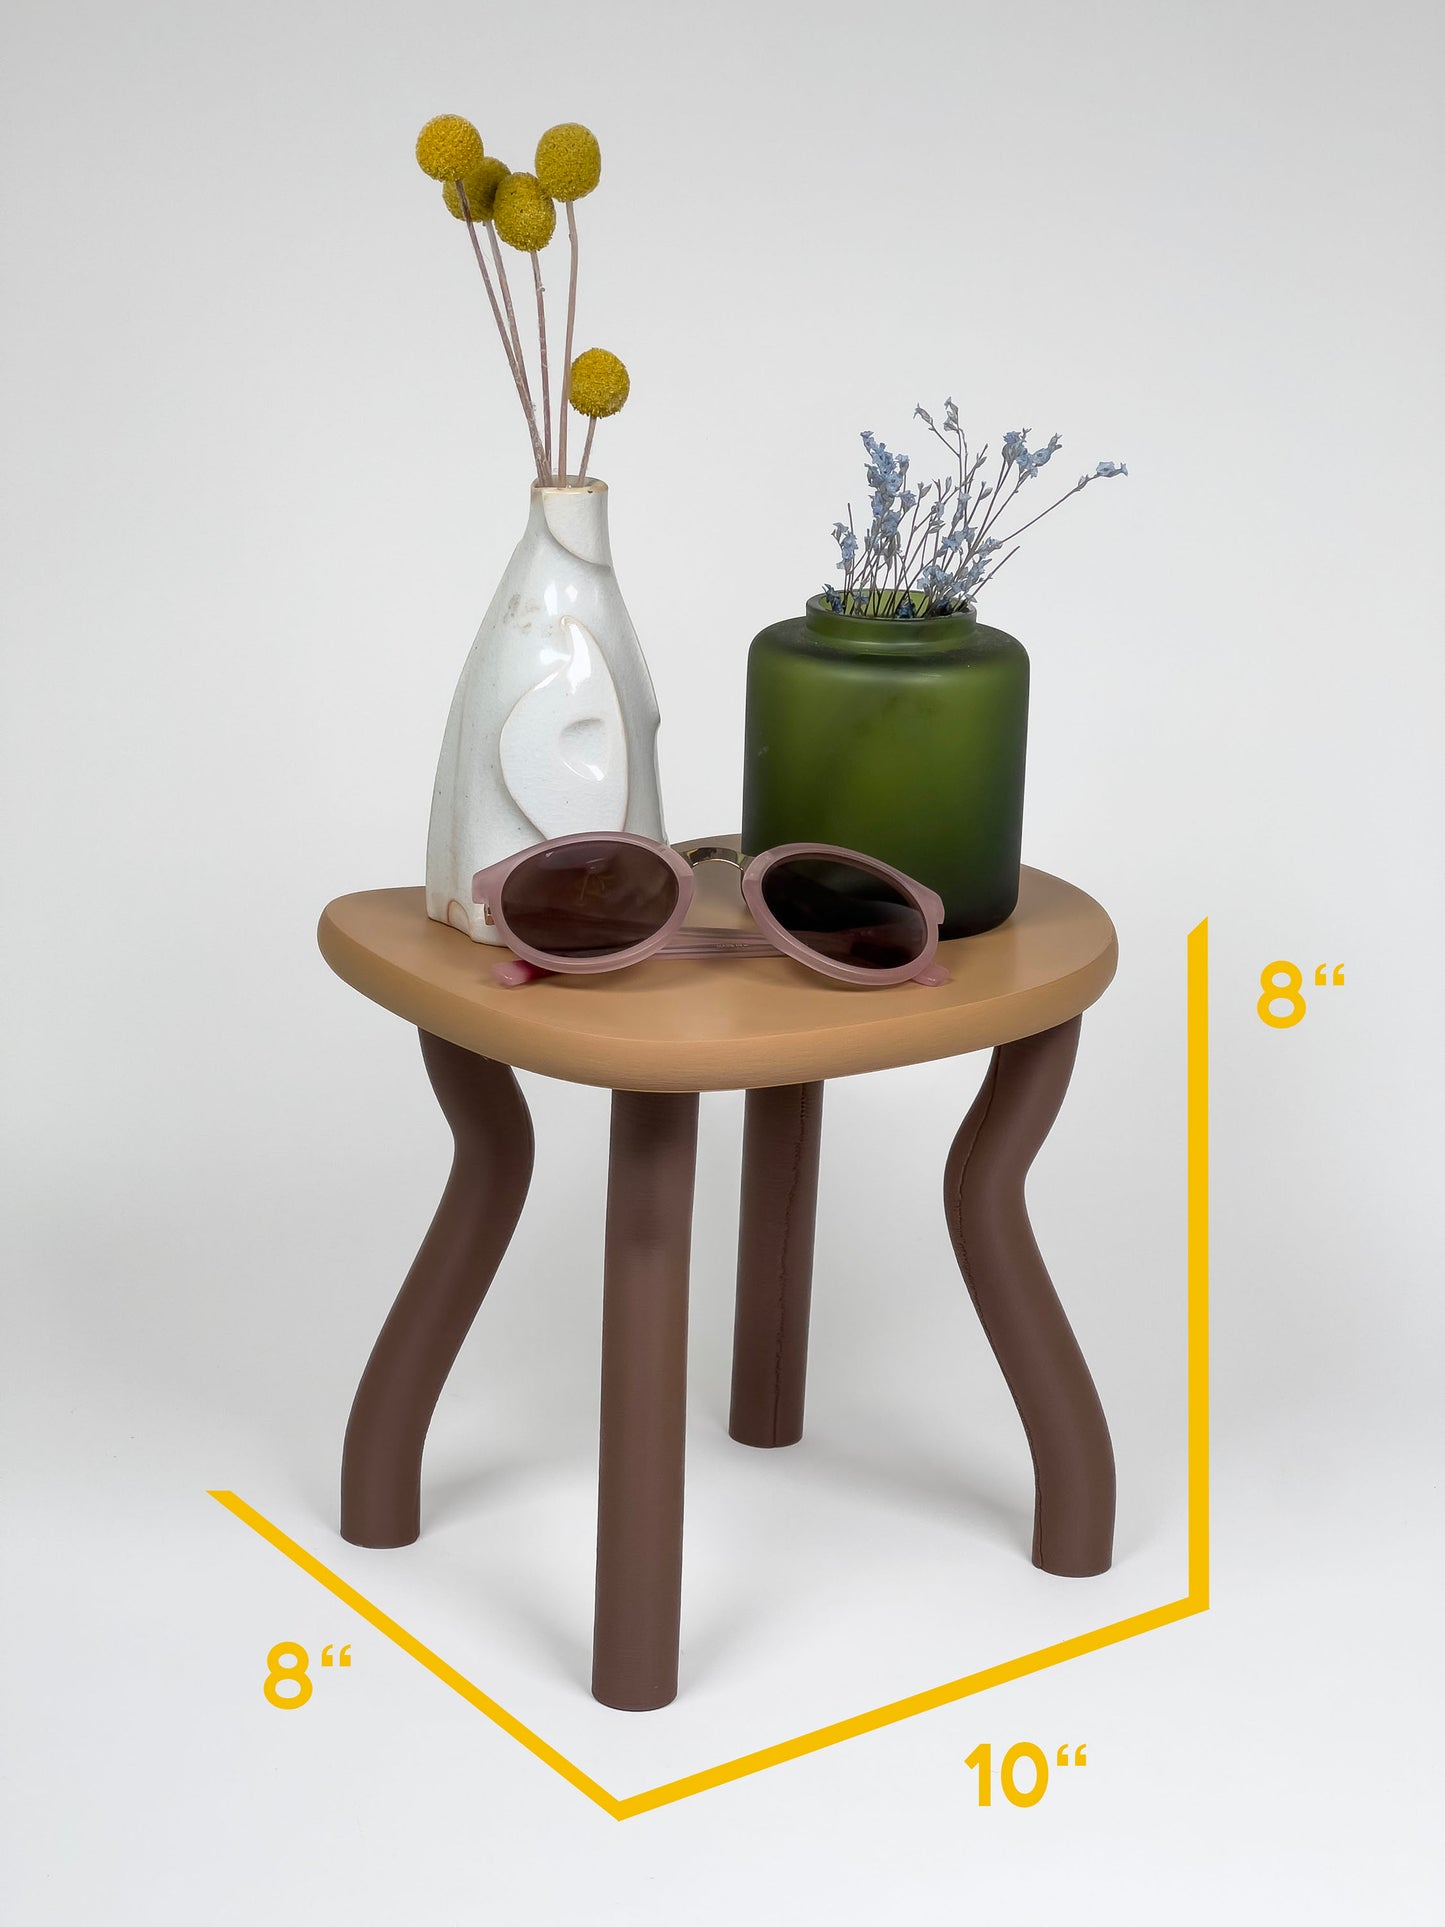 Saddle Up Plant Stand